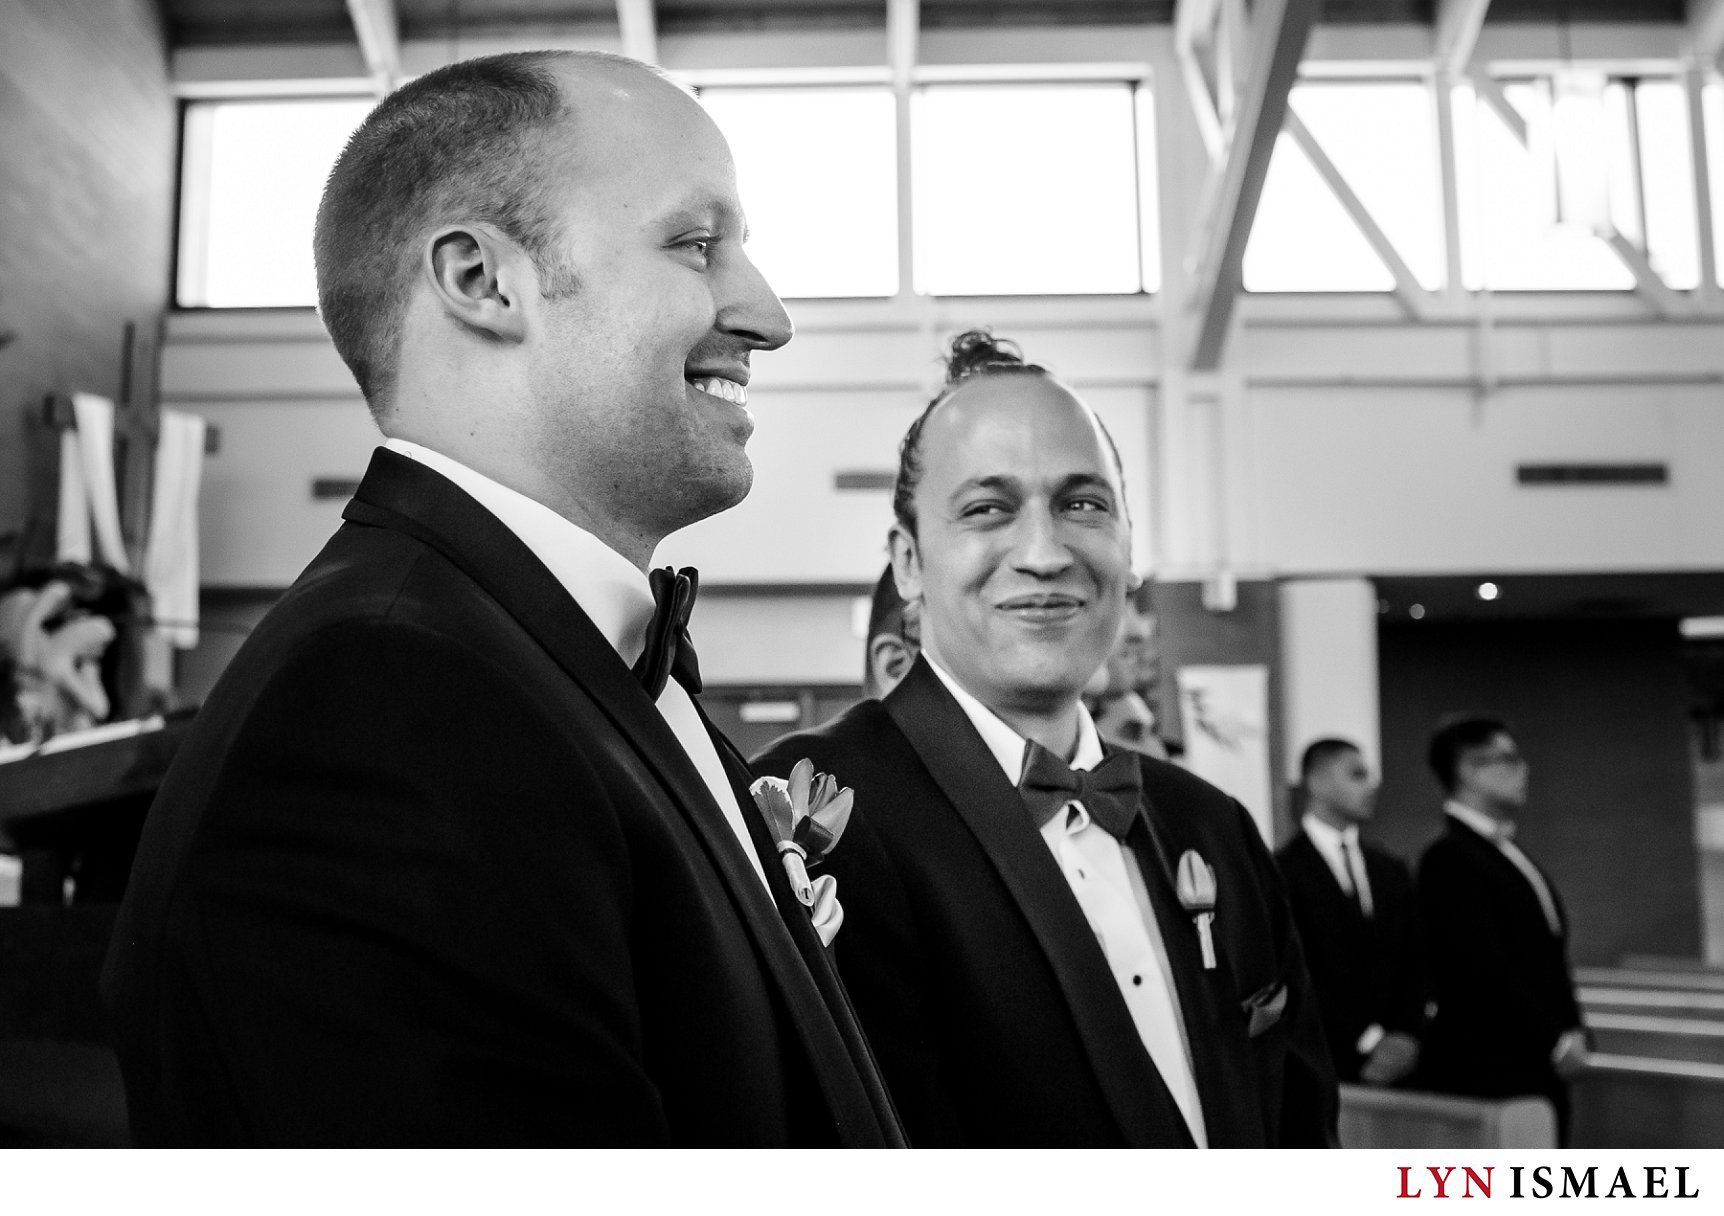 Groom's brother has a happy reaction to watching his brother see his bride walk down the aisle